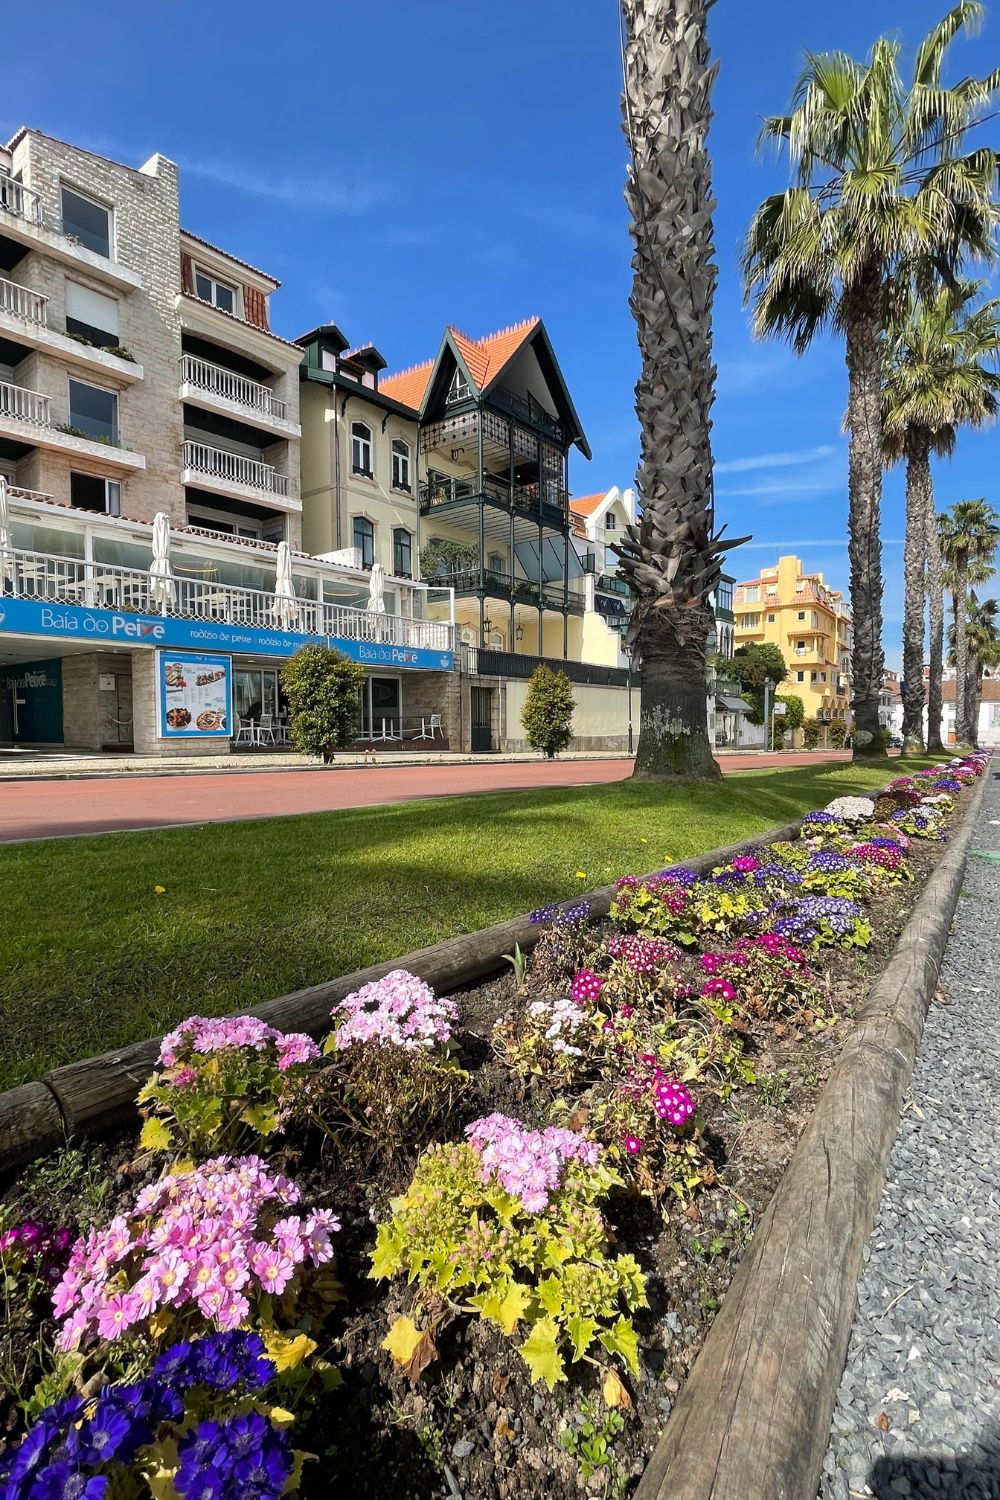 A colorful flowerbed bursting with purple, pink, and yellow blooms borders a well-kept grassy area with palm trees and a variety of charming buildings in the background, showcasing the lively and beautiful landscaping of Cascais.